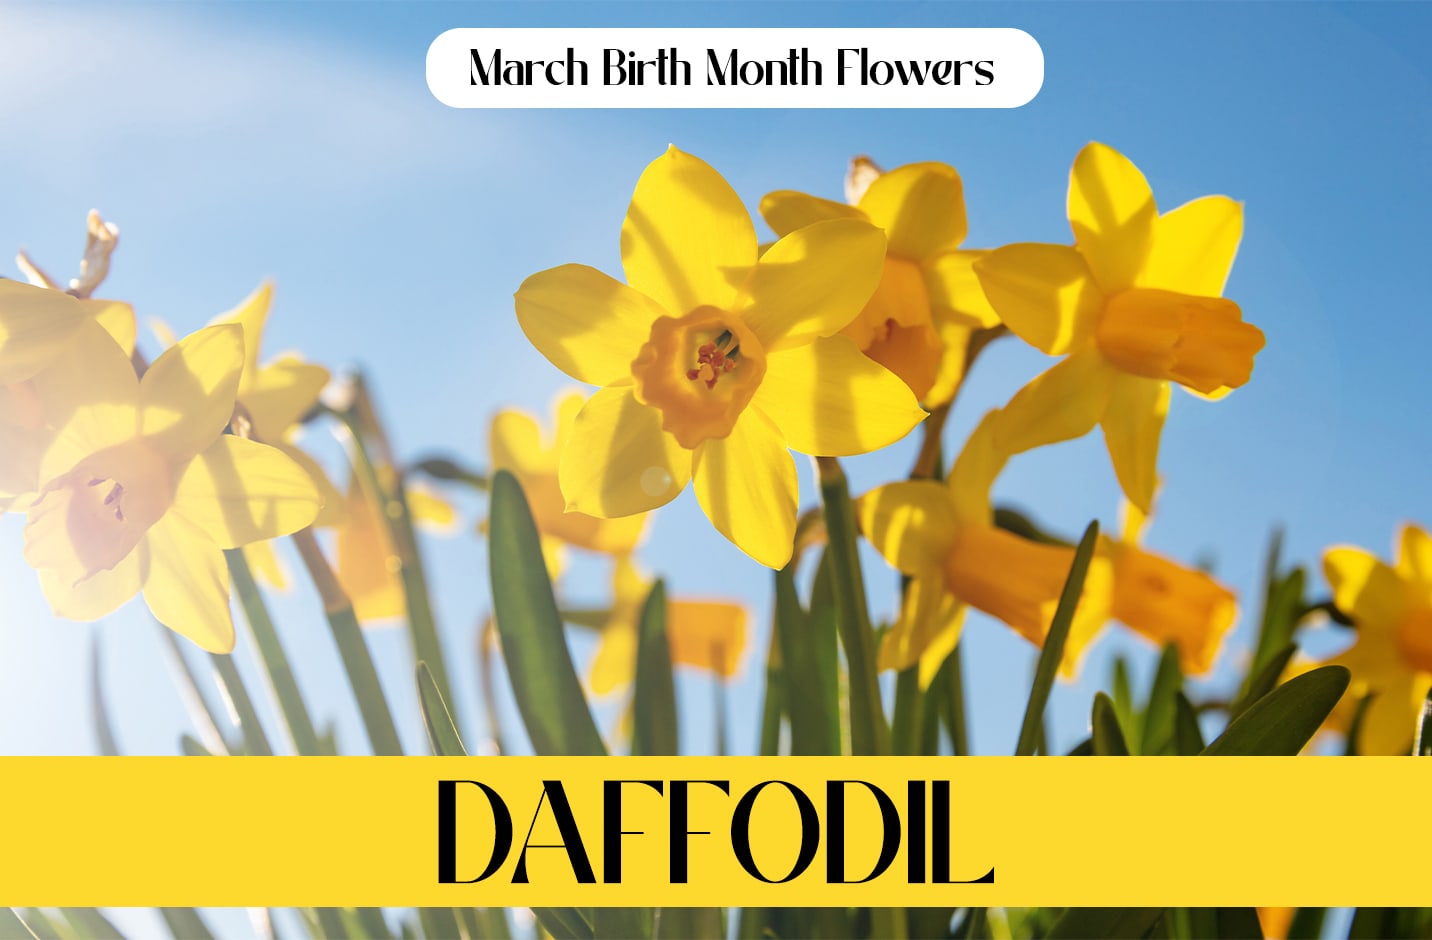 March Birth Month Flowers